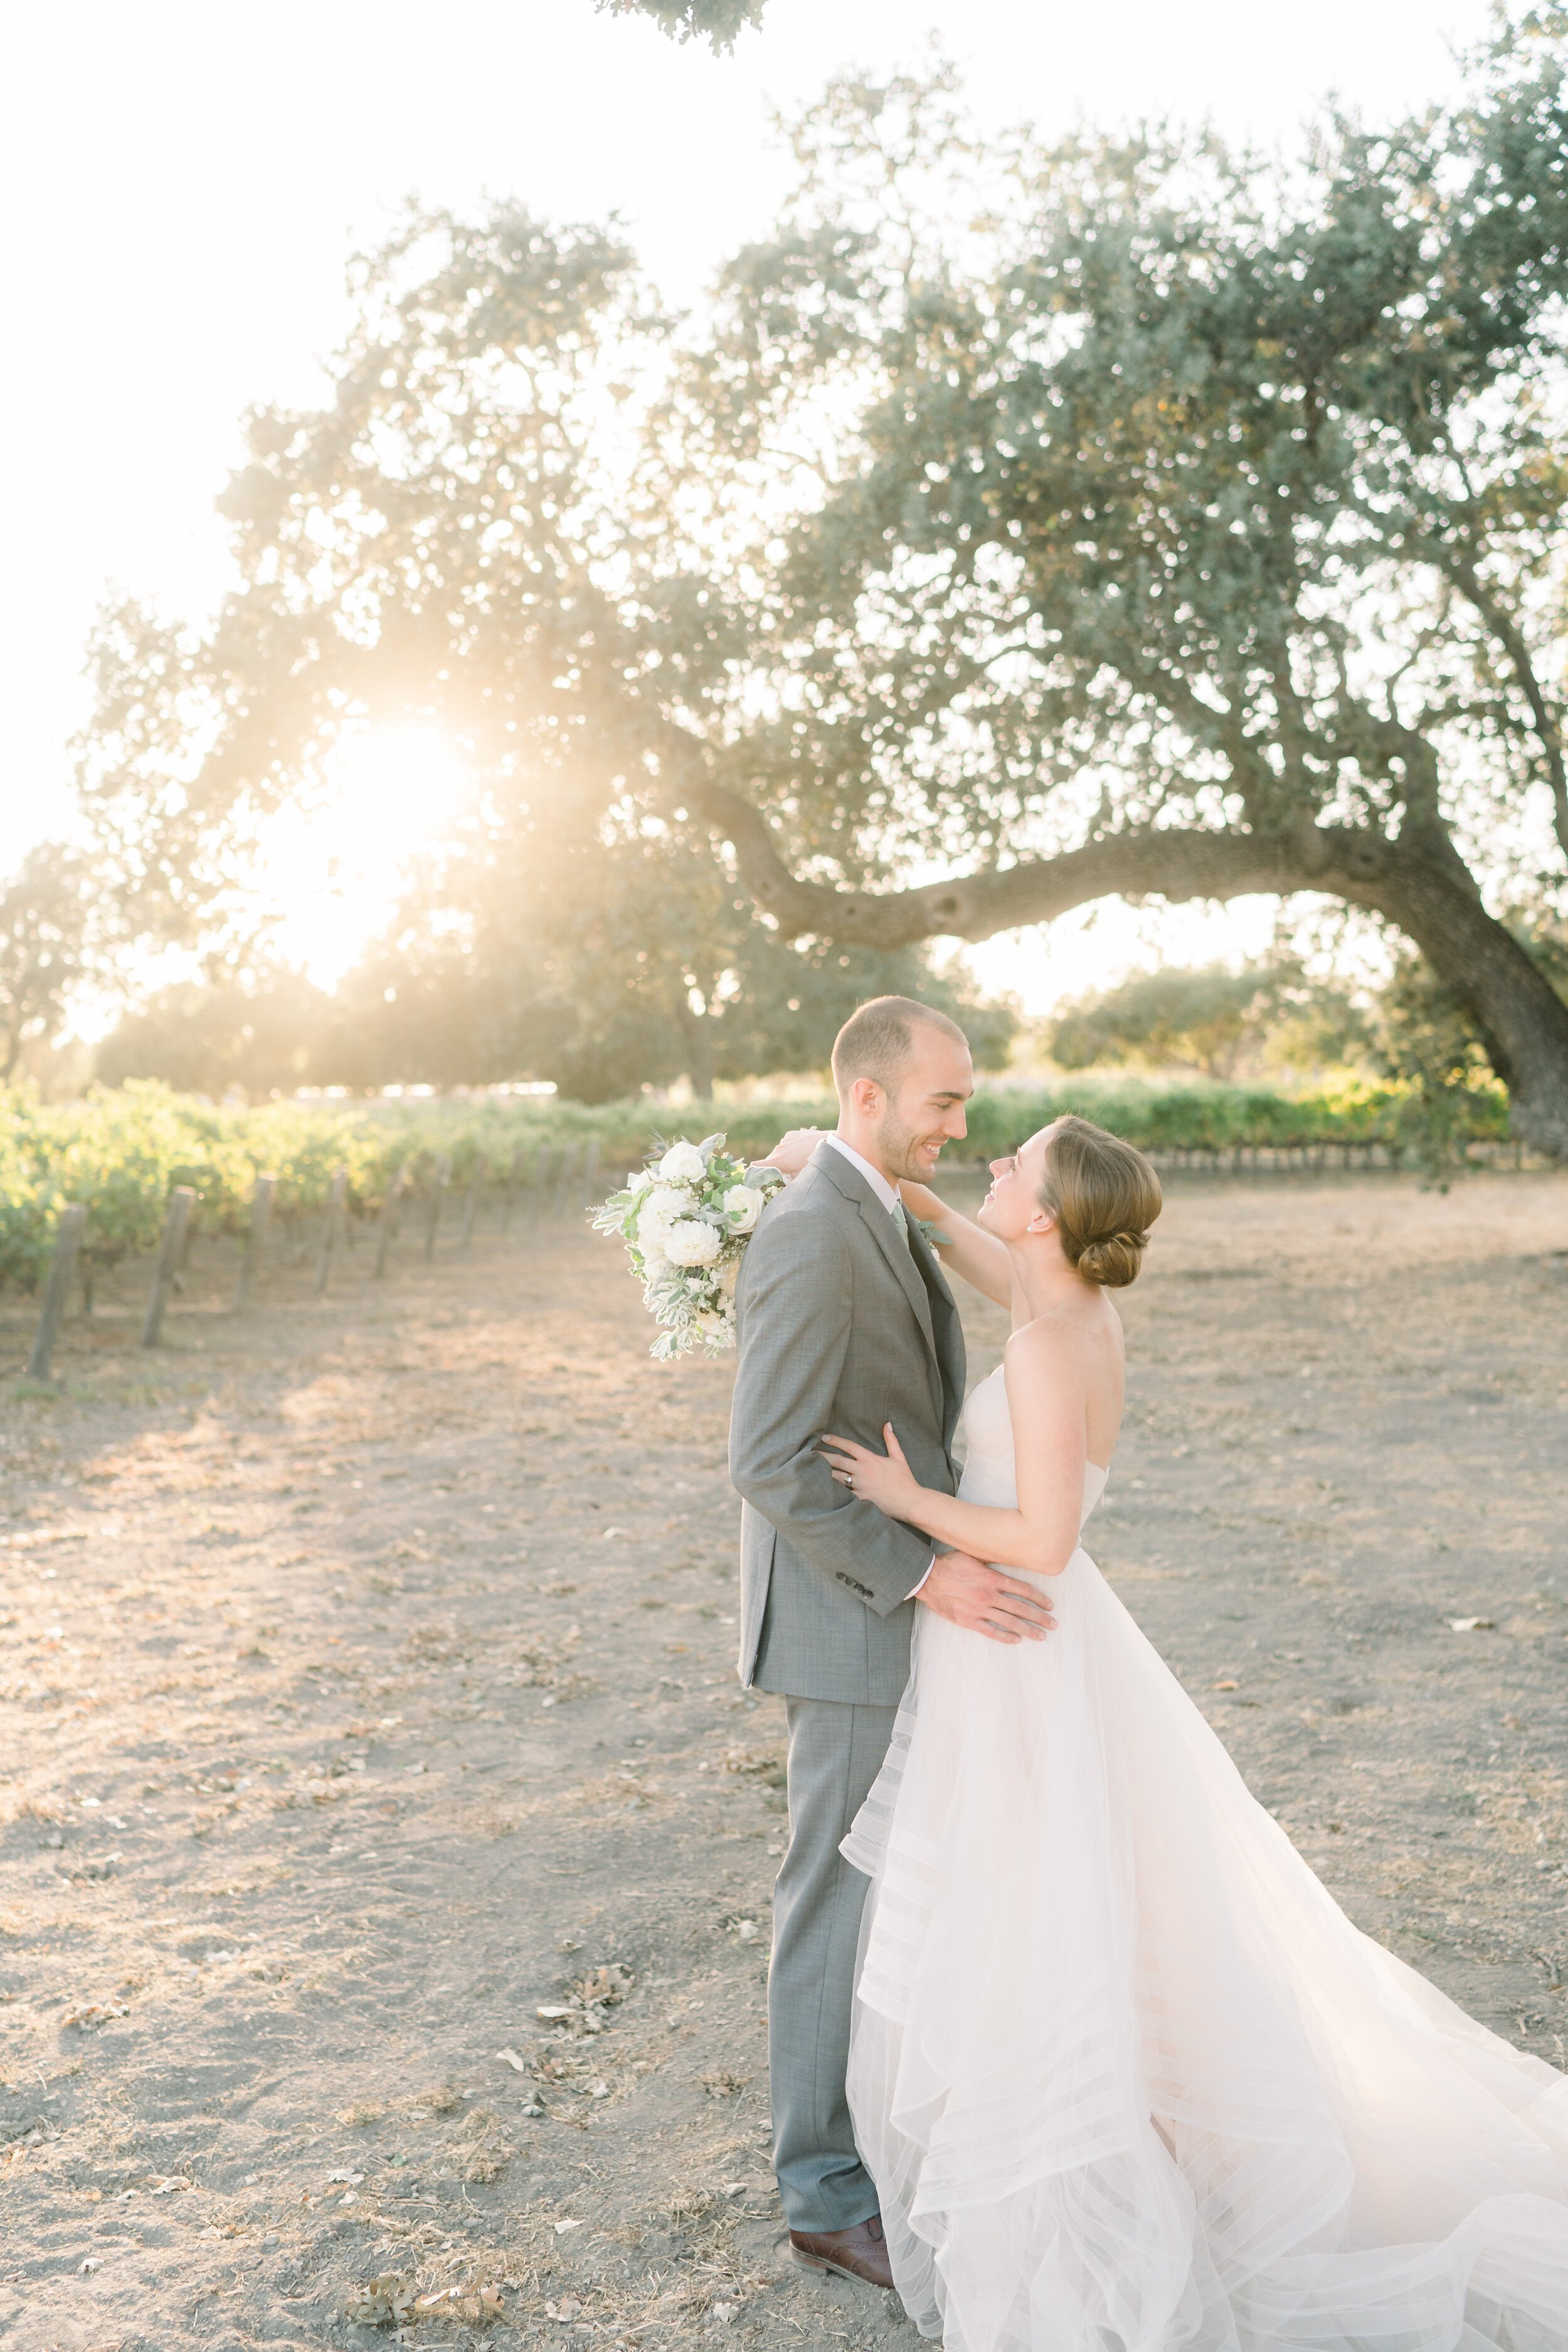 www.santabarbarawedding.com | We Heart Photography | Roblar Winery | Elizabeth Ginder Events | Alexis Ireland Florals | Mishay Salon | Camaille Victoria | Bride and Groom in the Winery